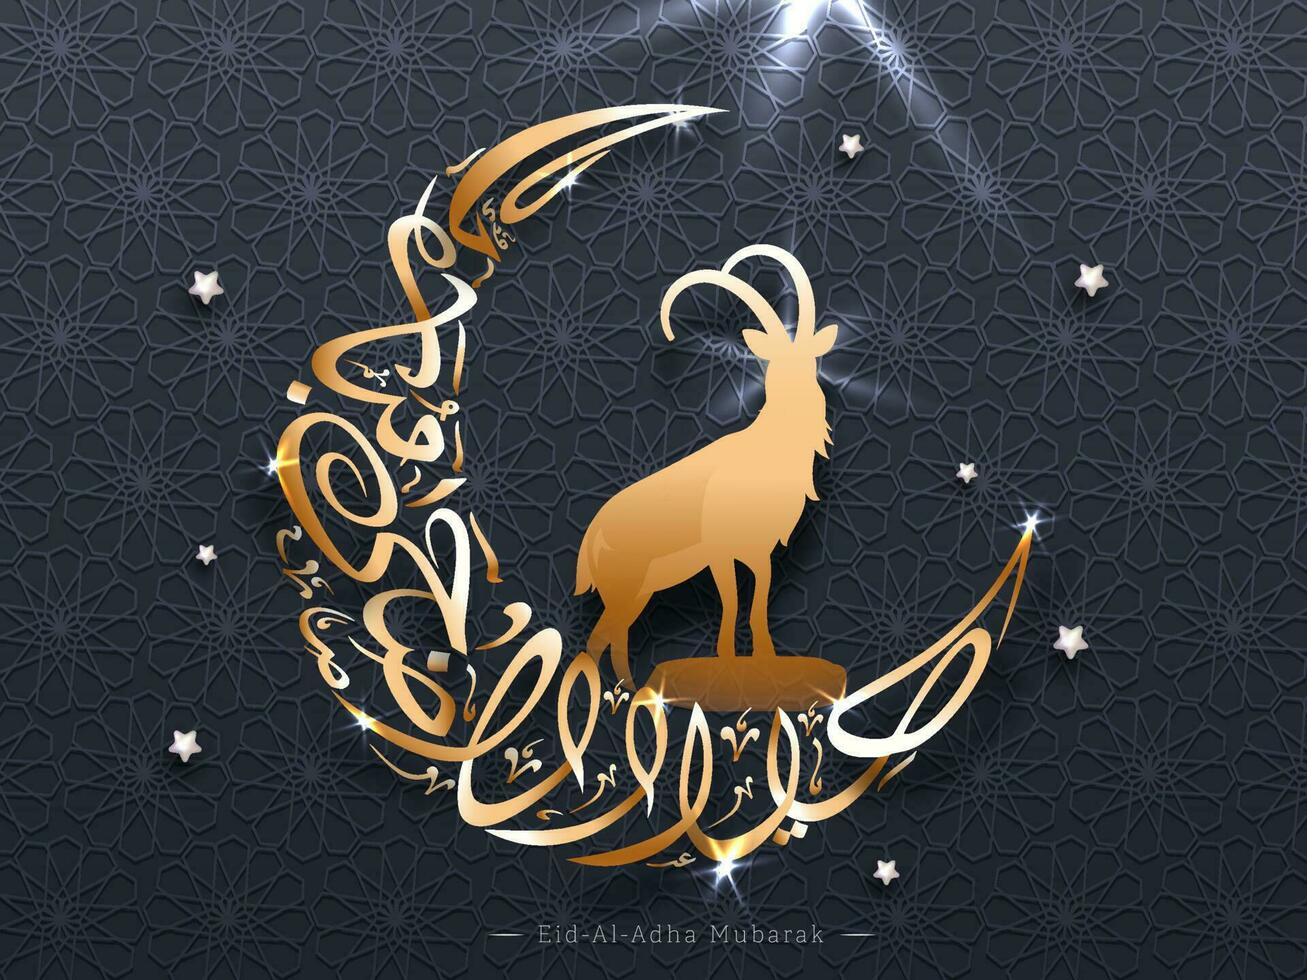 Bronze Arabic Calligraphy of Eid-Al-Adha Mubarak in Crescent Moon Shape with Silhouette Goat, Stars and Lights Effect on Grey Mandala Pattern Background. vector